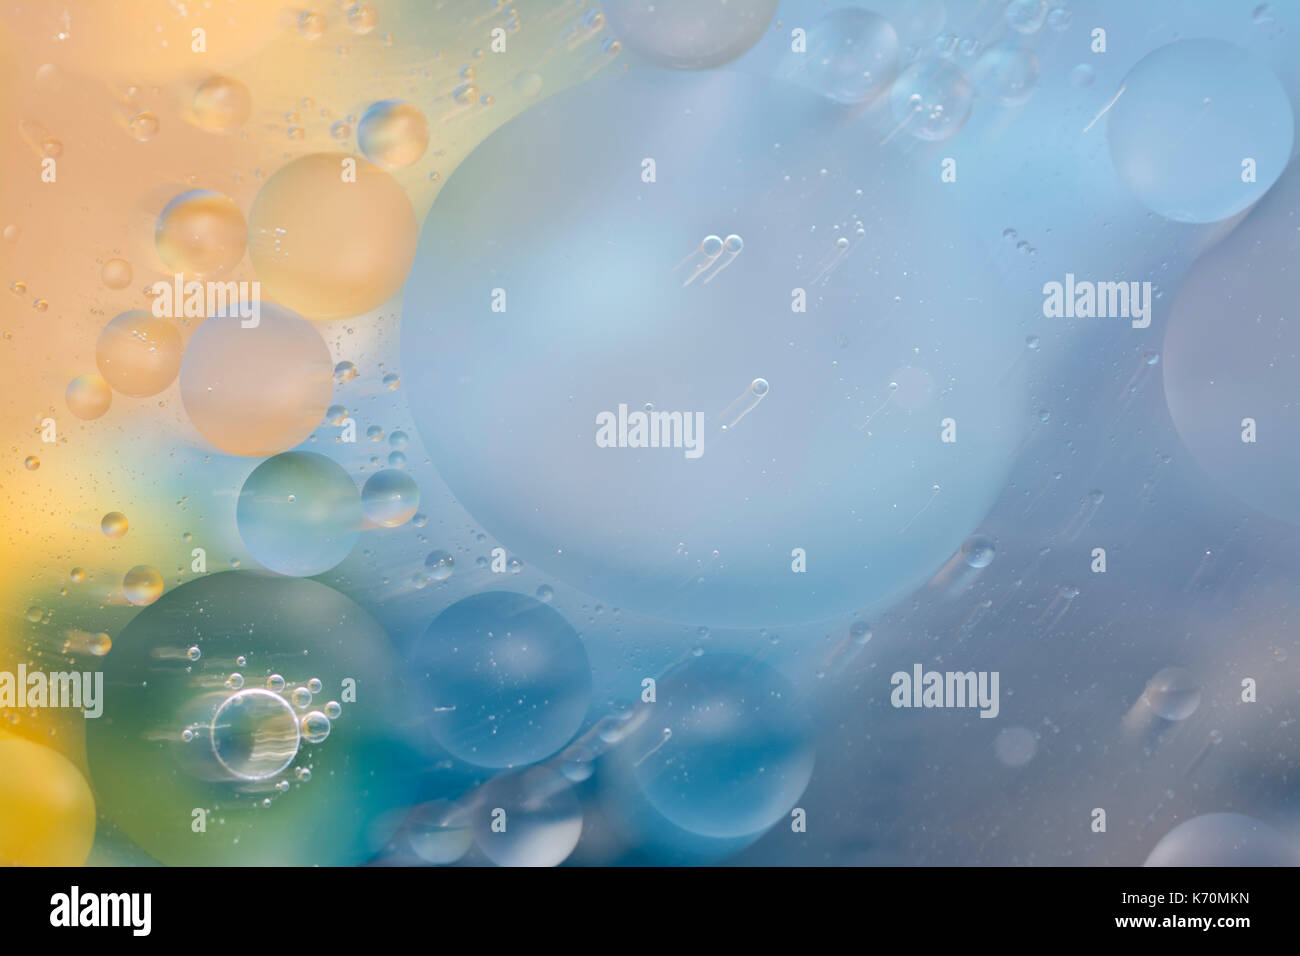 Oil and Water Mixture Bubble Abstract Background Wallpaper Stock Photo ...